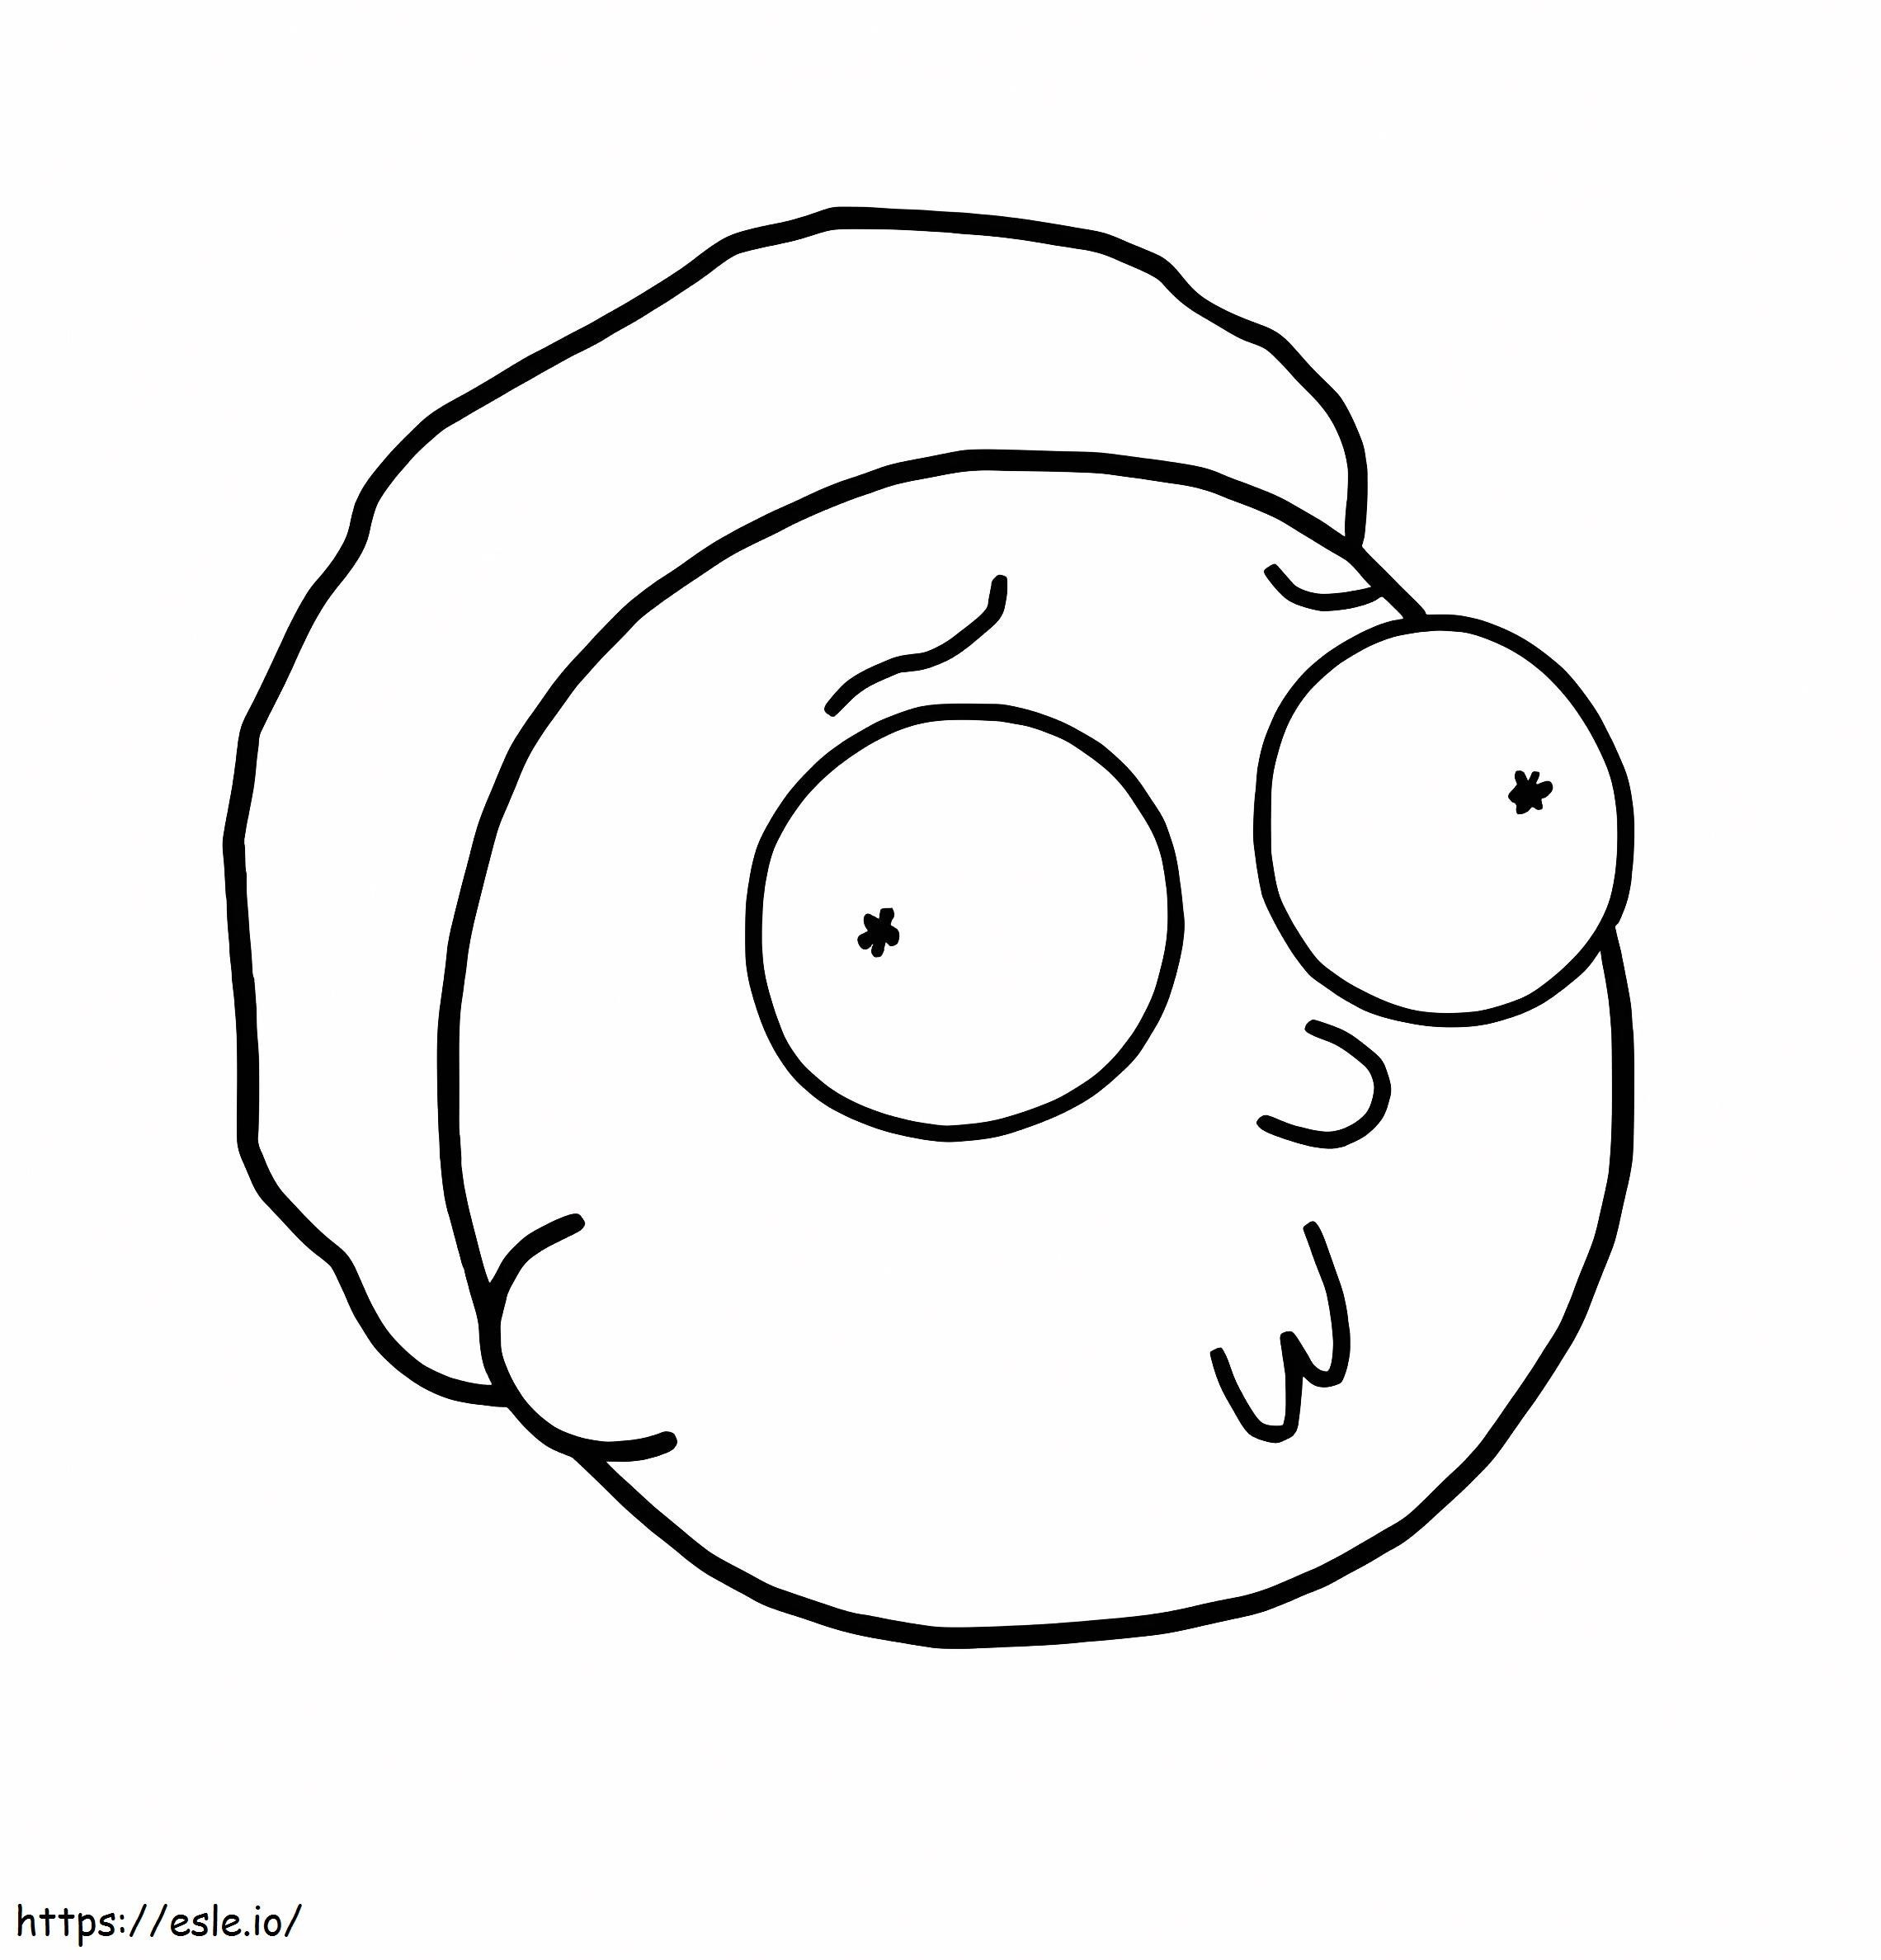 Morty Face coloring page